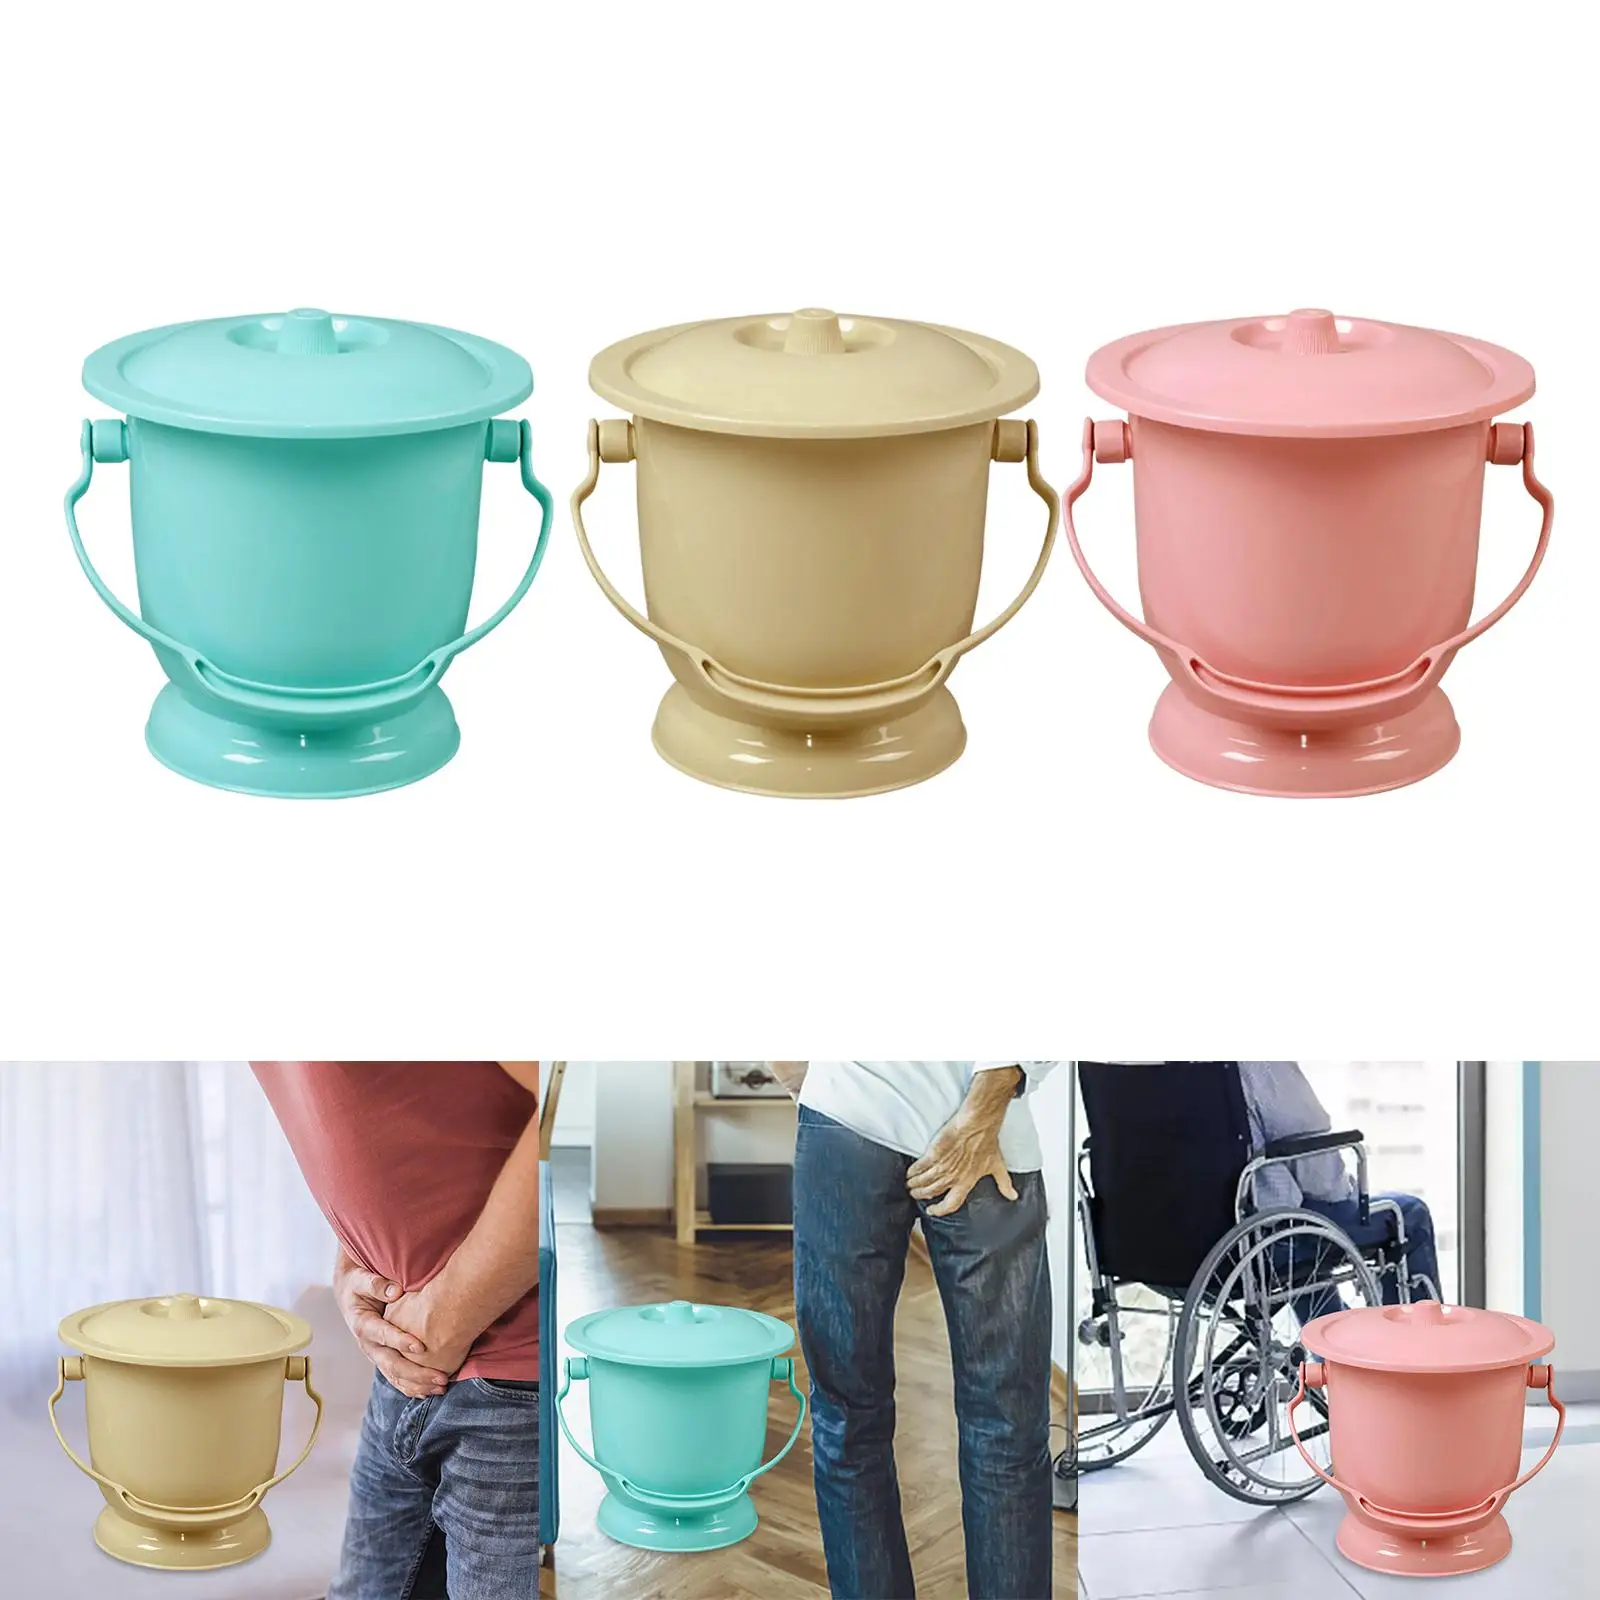 Chamber Pot with Lid Spittoon Bedpan Bright Color Portable Urinal Bottle